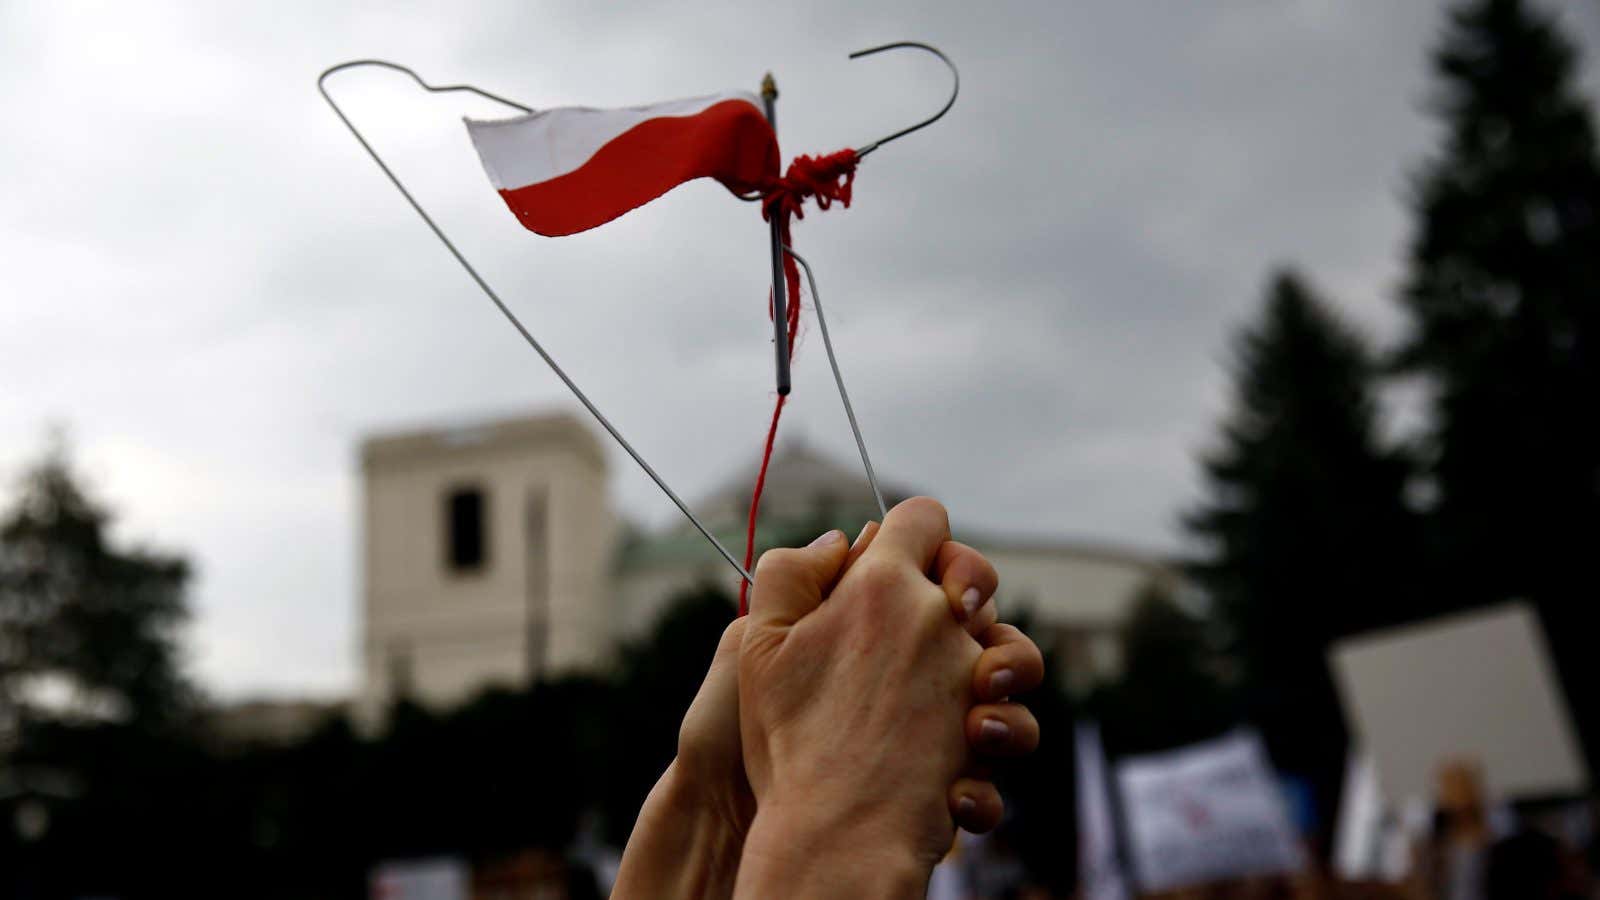 A symbol of protest in Poland.